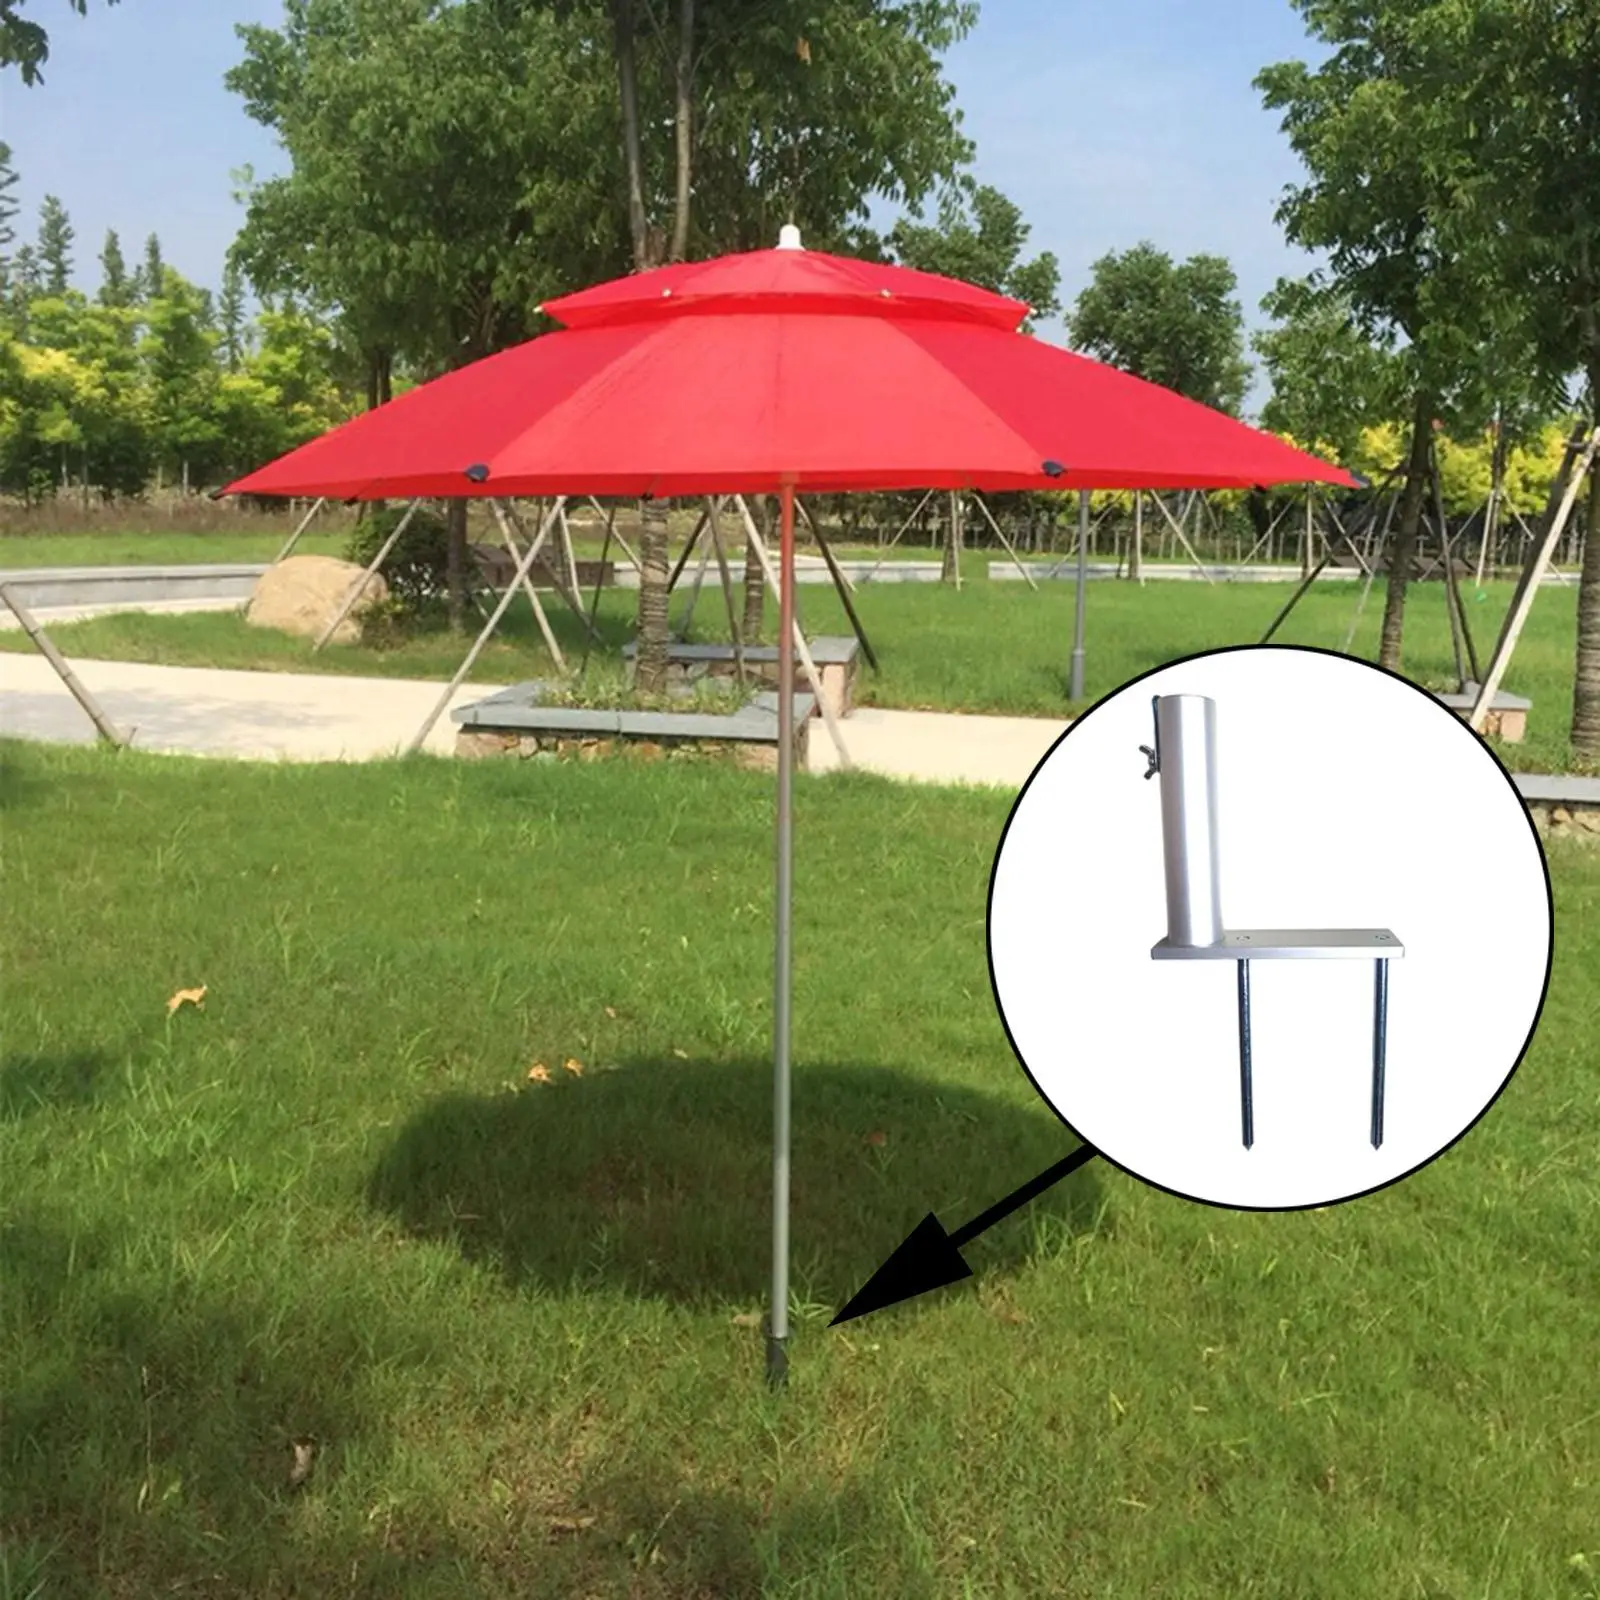 Silver Upgraded Patio Umbrella Clamp Ground Stakes for Lawns Aluminum Alloy